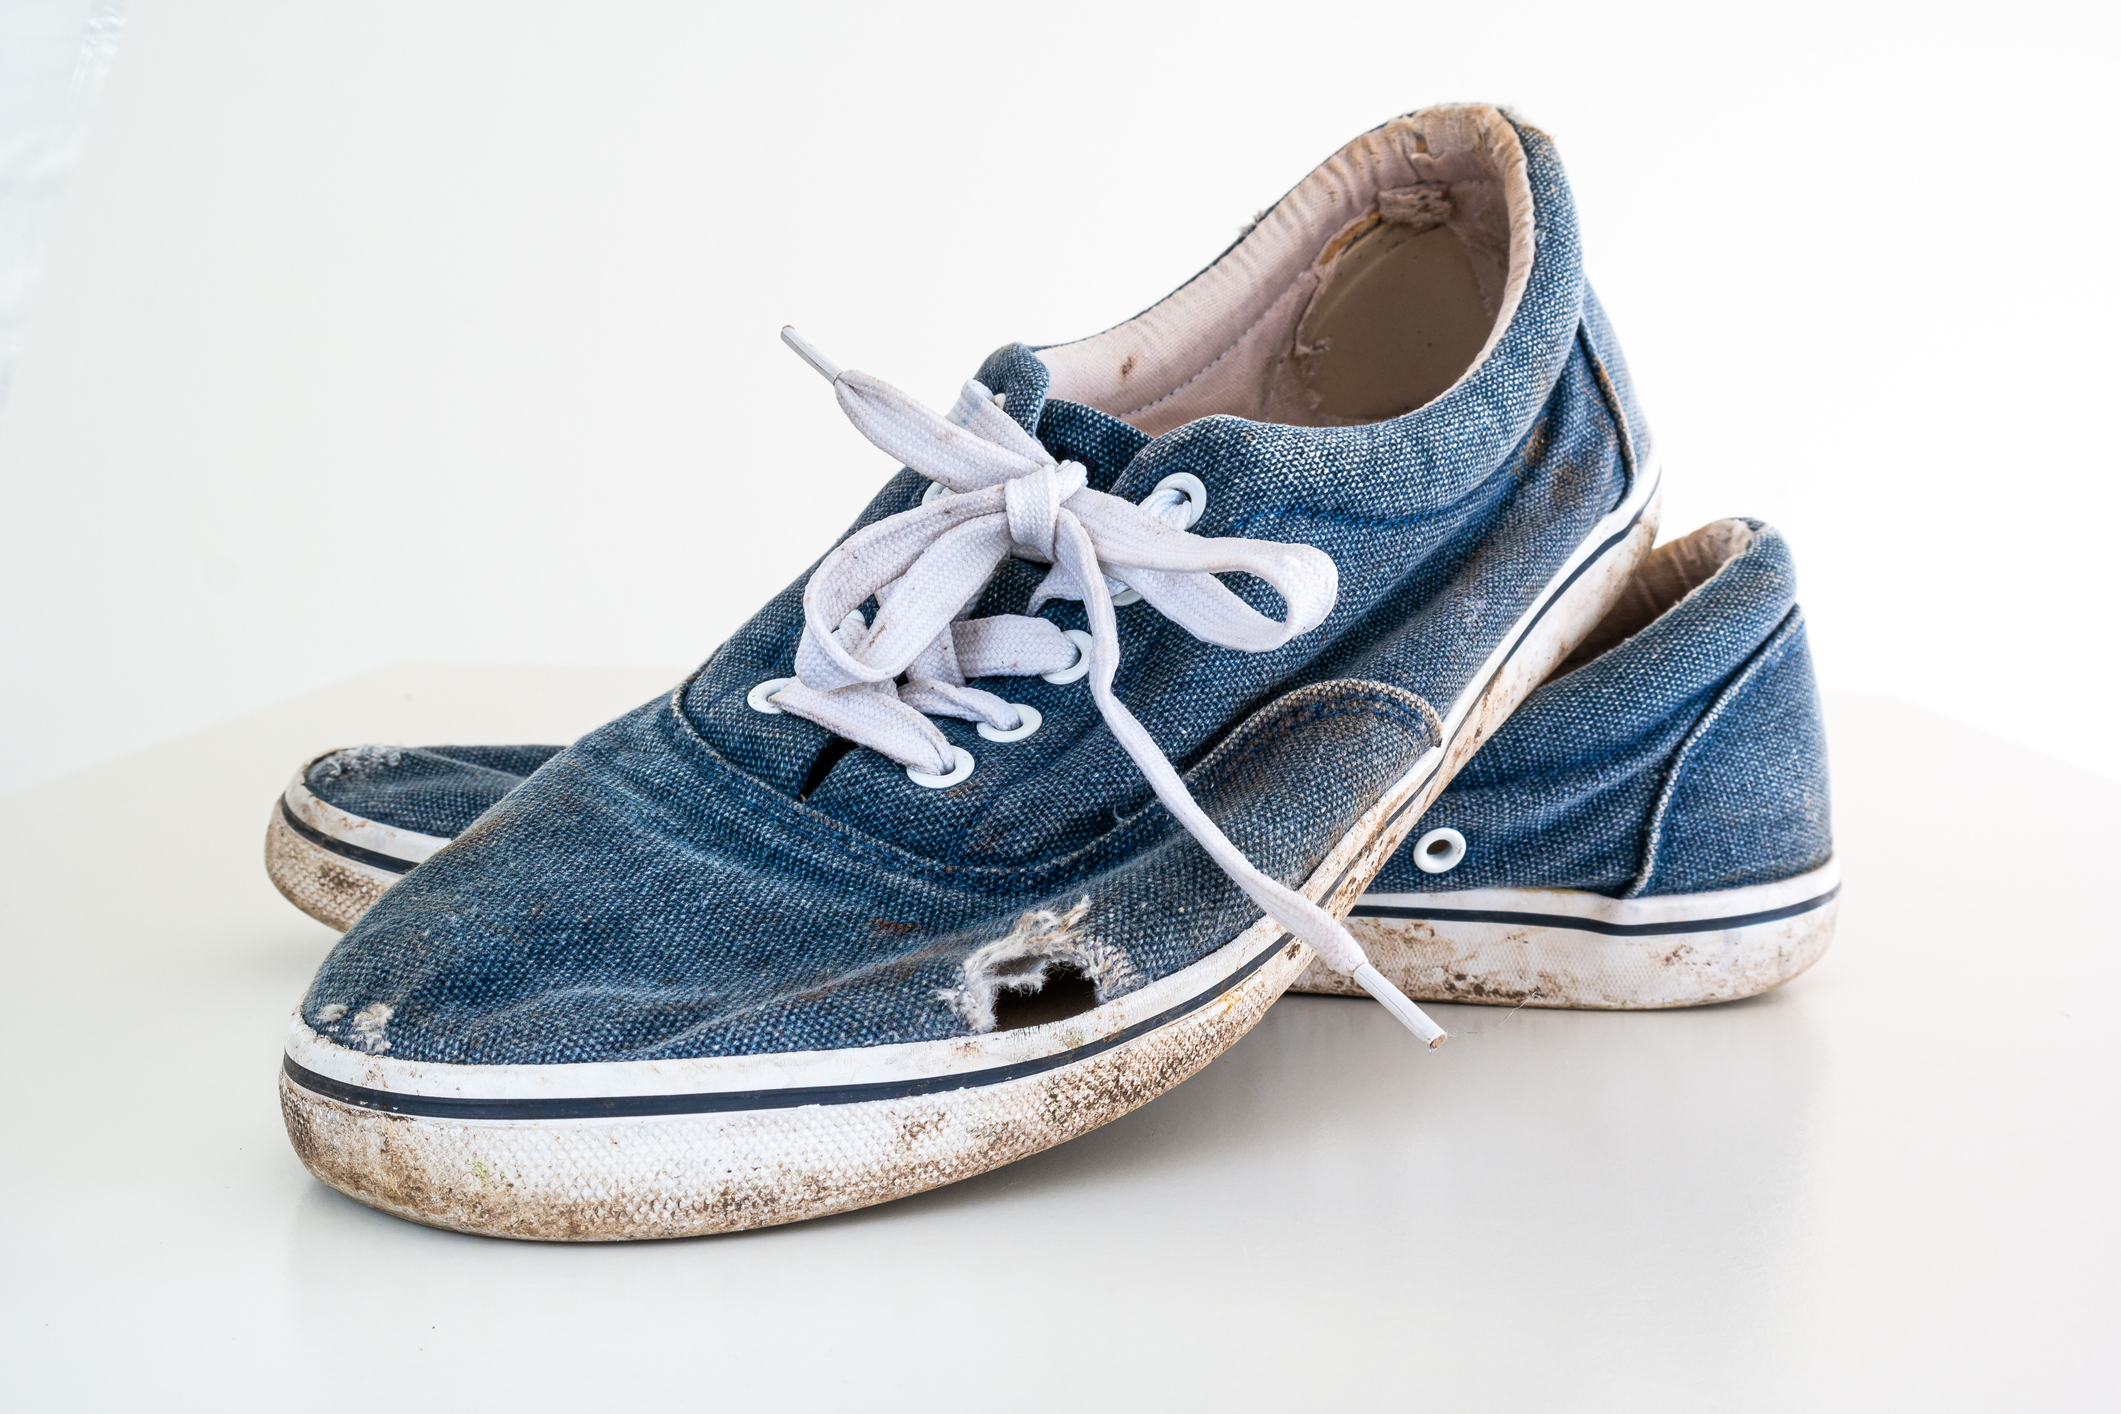 A pair of worn-out kids&#x27; sneakers with untied laces